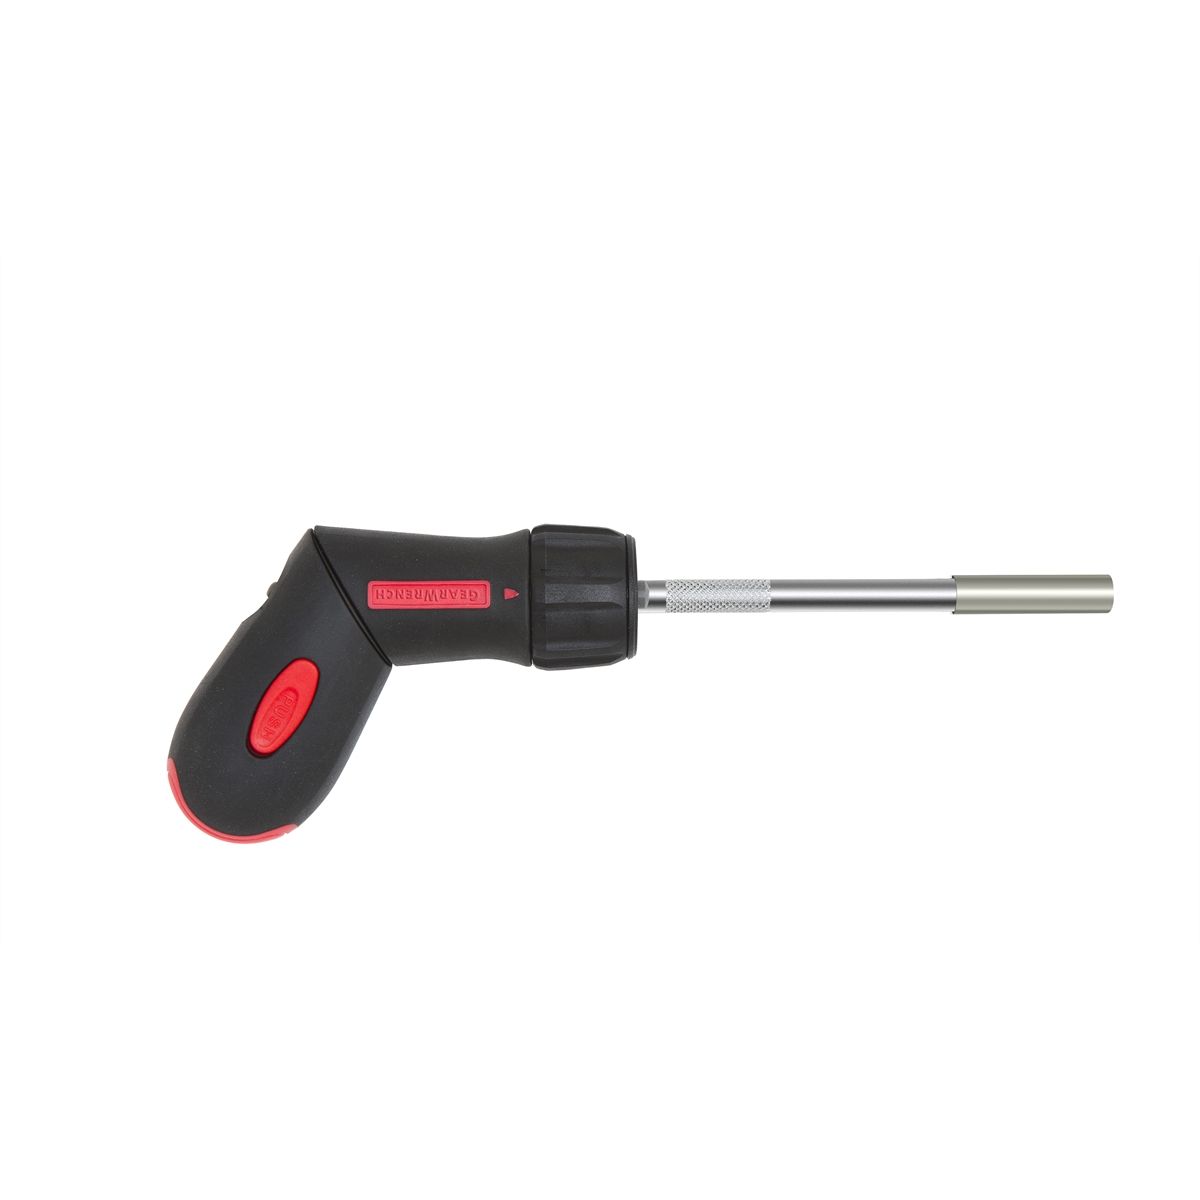 2 Position Ratcheting Screwdriver with LED Lights...